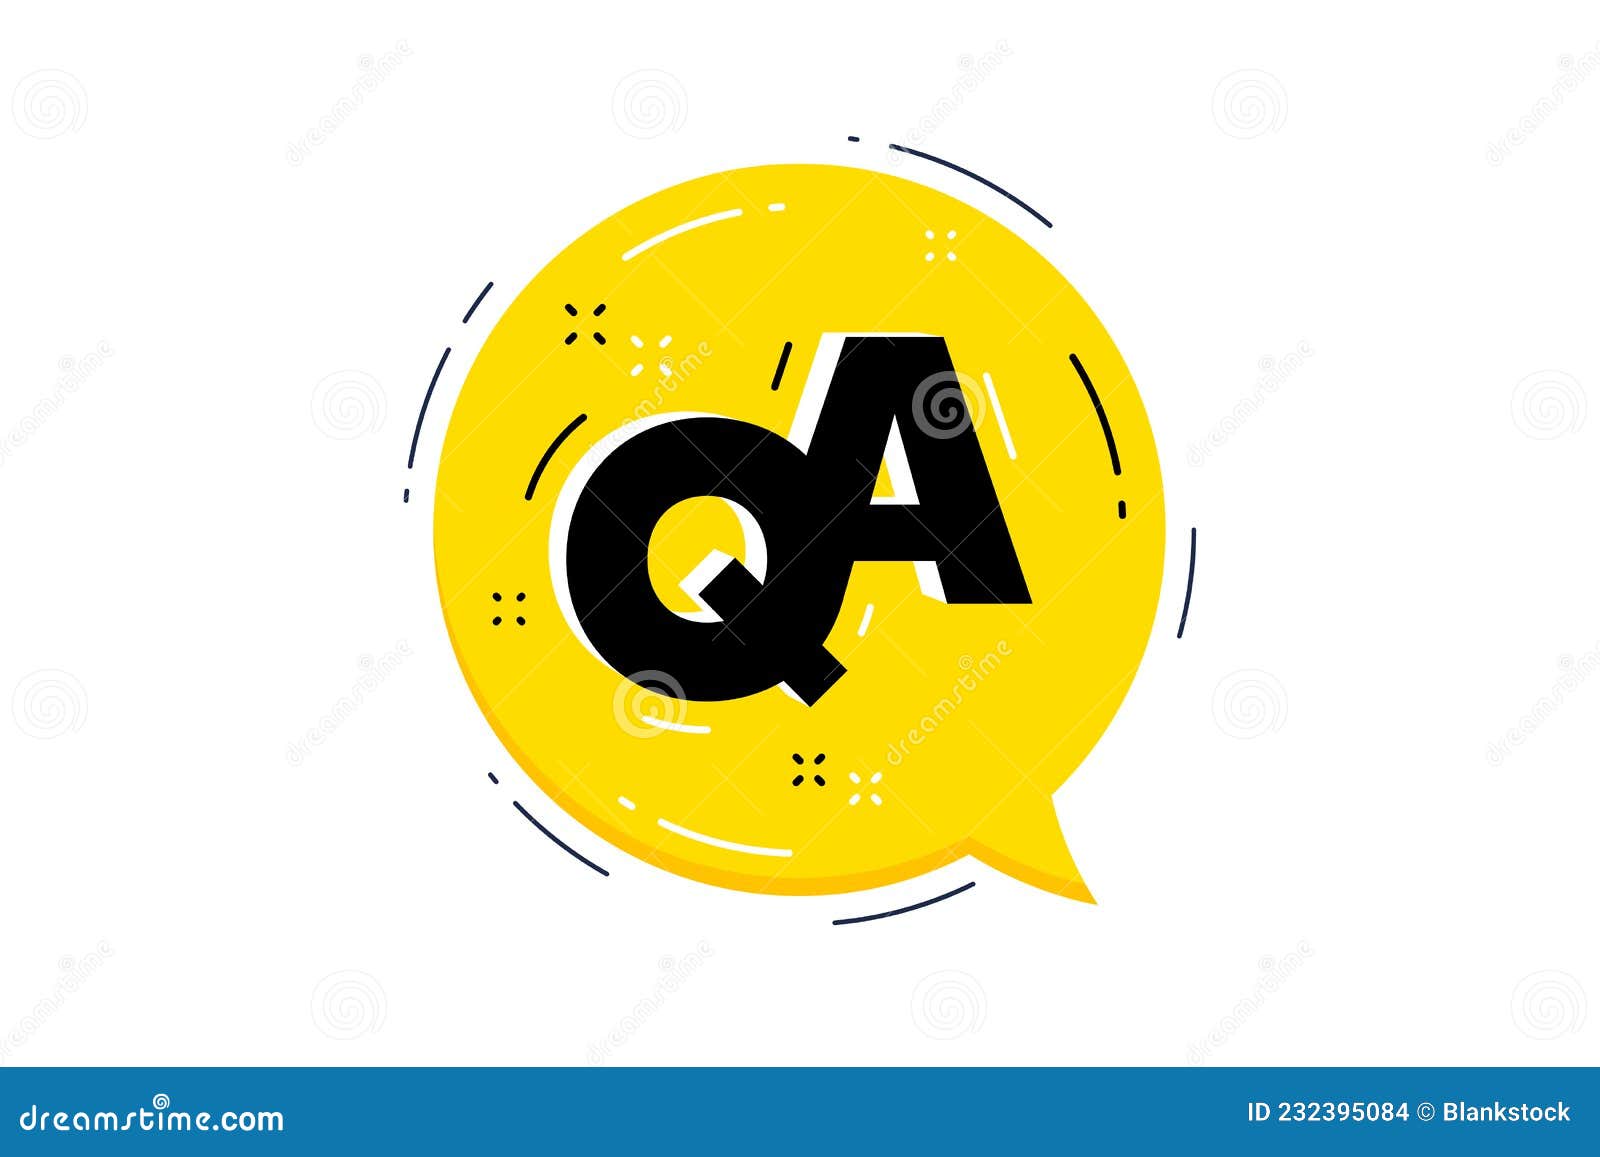 qa yellow speech bubble. faq questionnaire chat . question and answer message. 